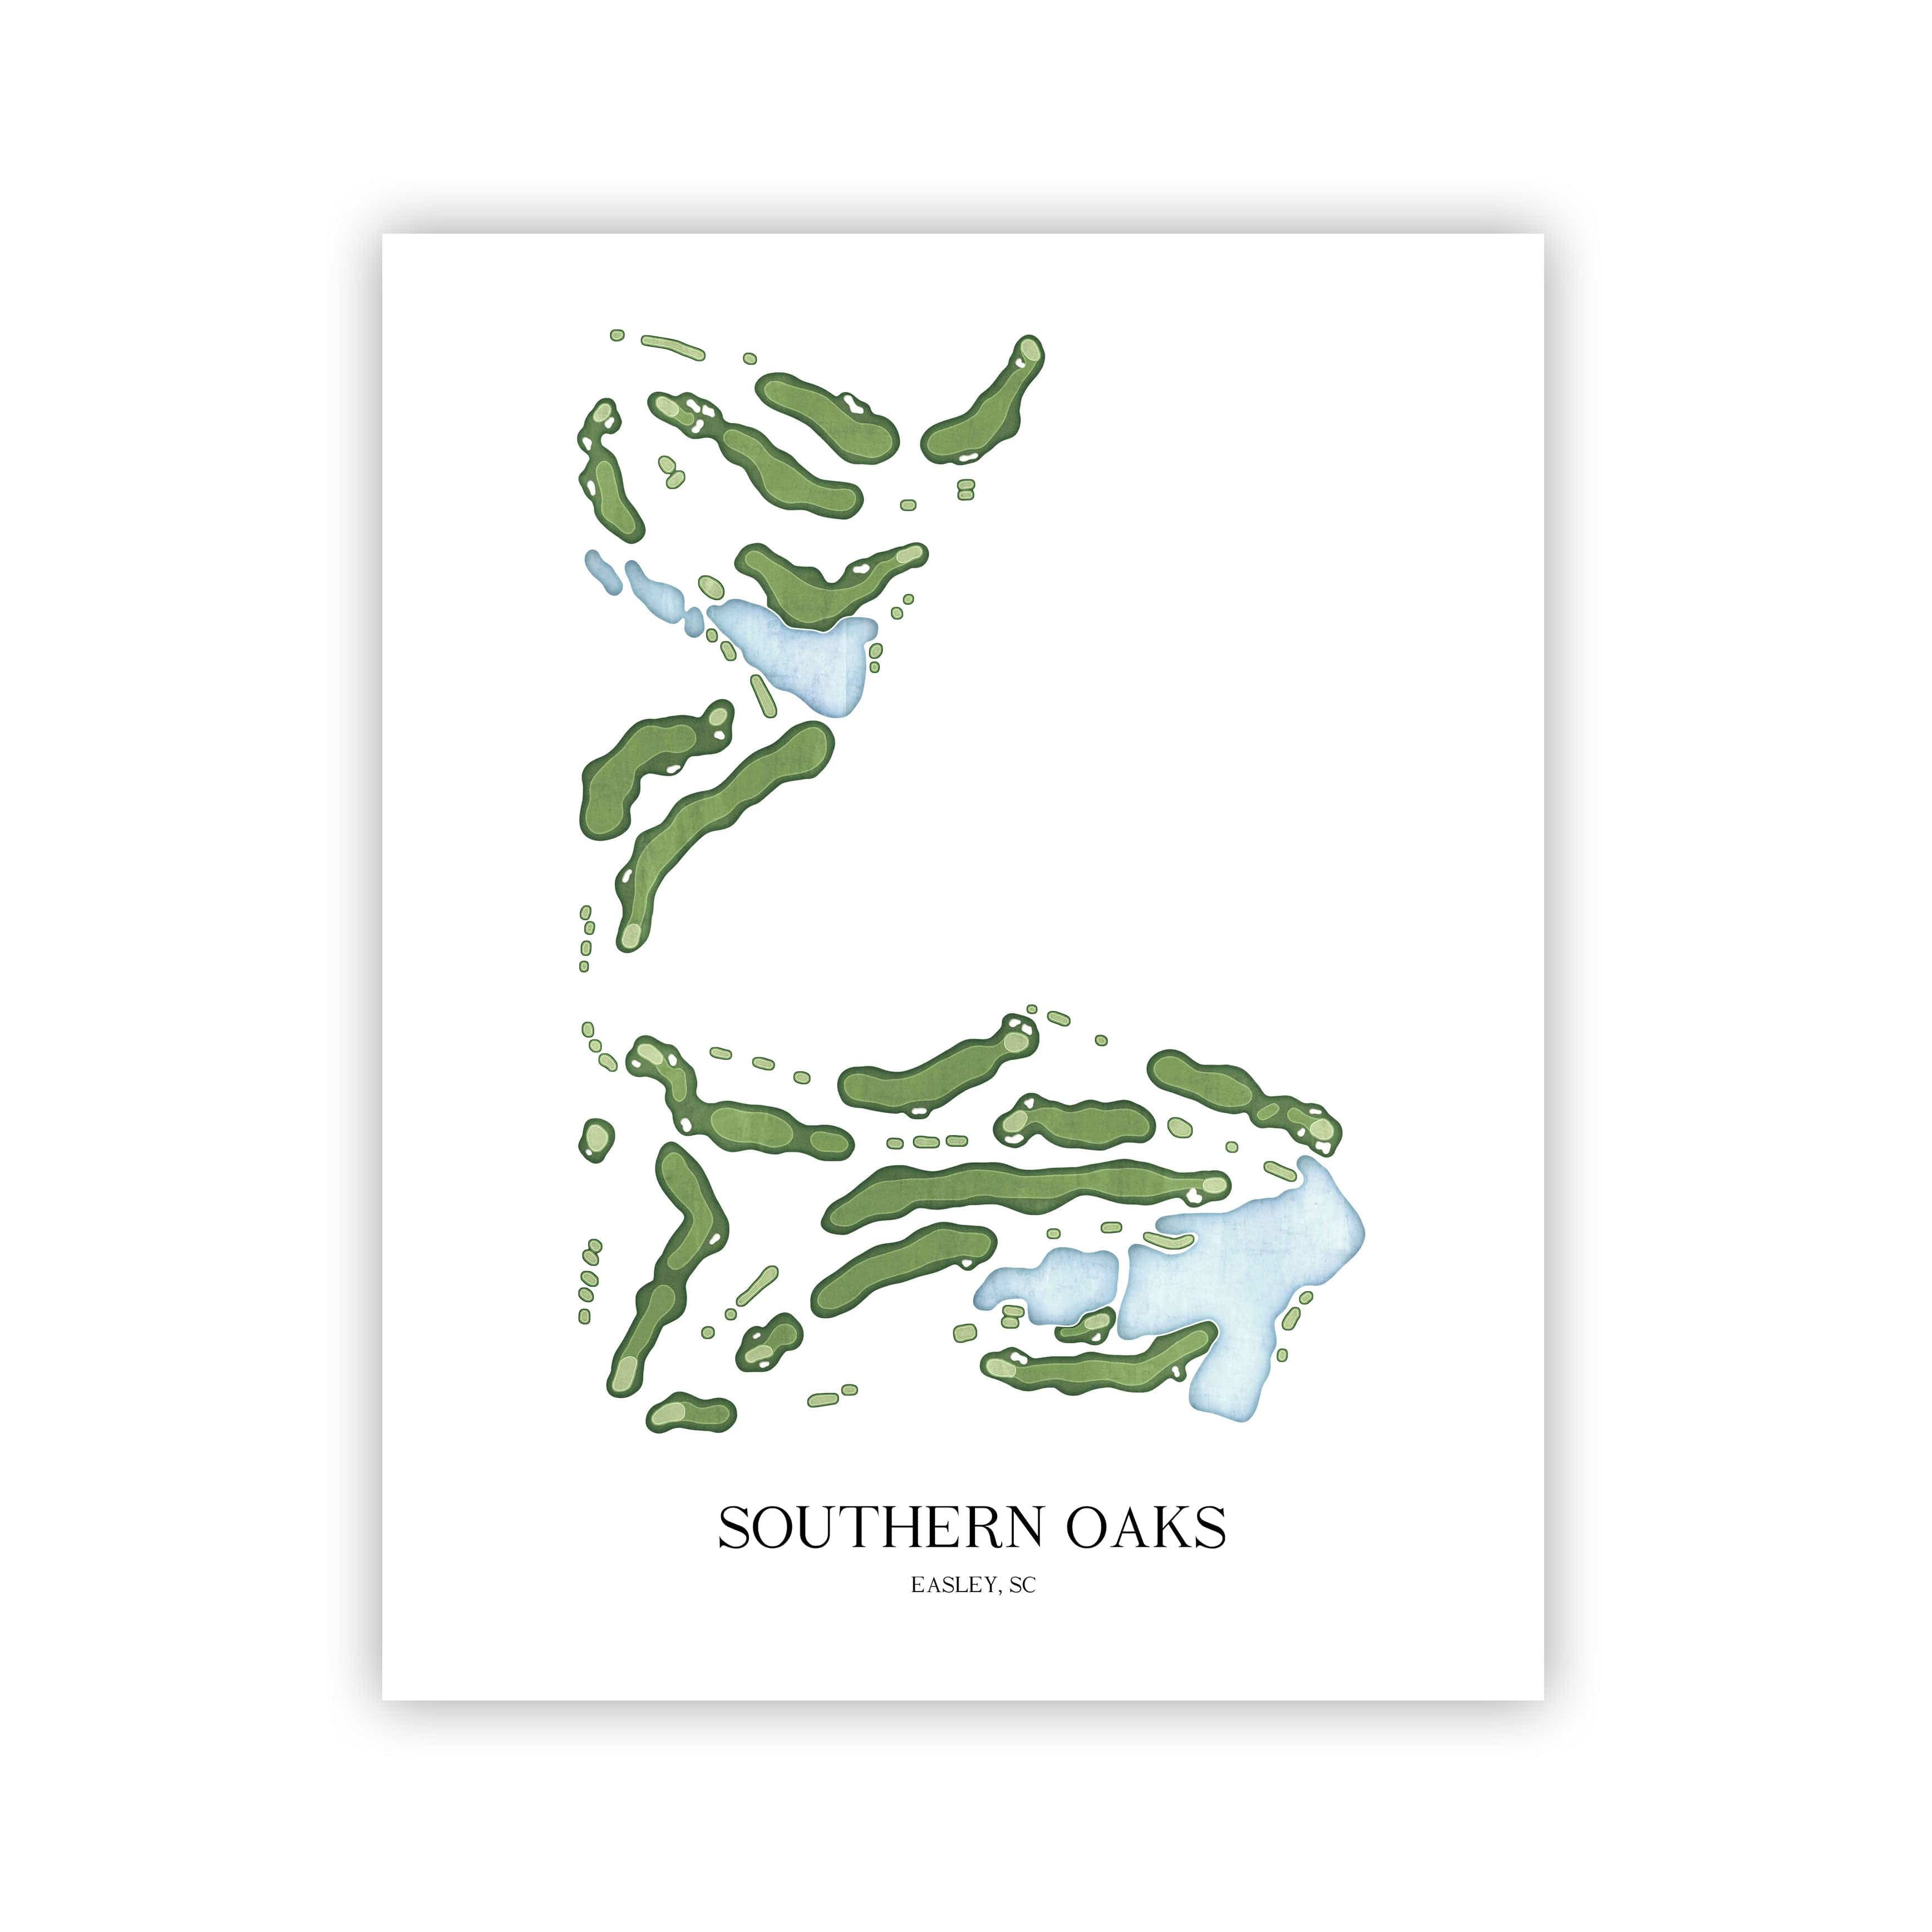 The 19th Hole Golf Shop - Golf Course Prints -  Southern Oaks Golf Course Map